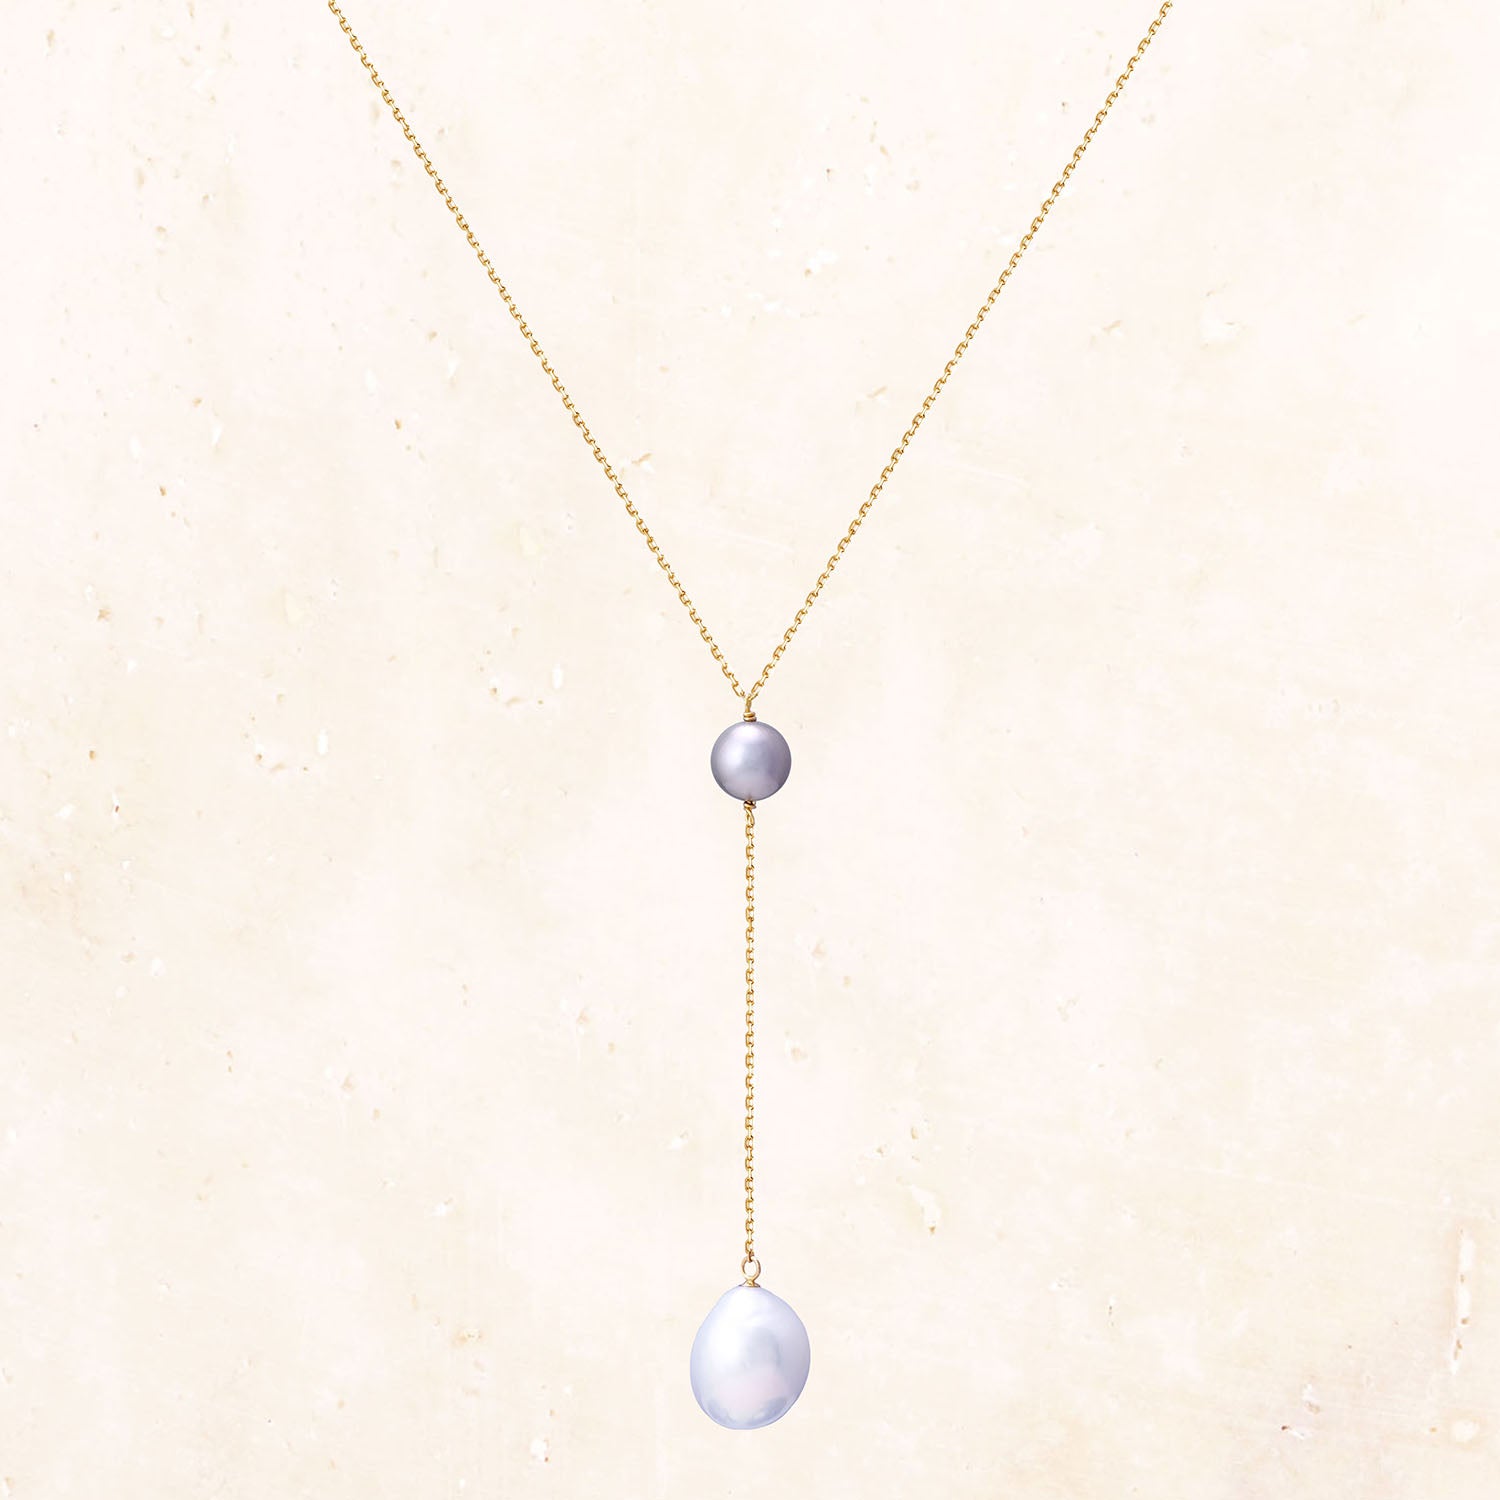 10K Gold Floating Pearl Necklace (Gray)